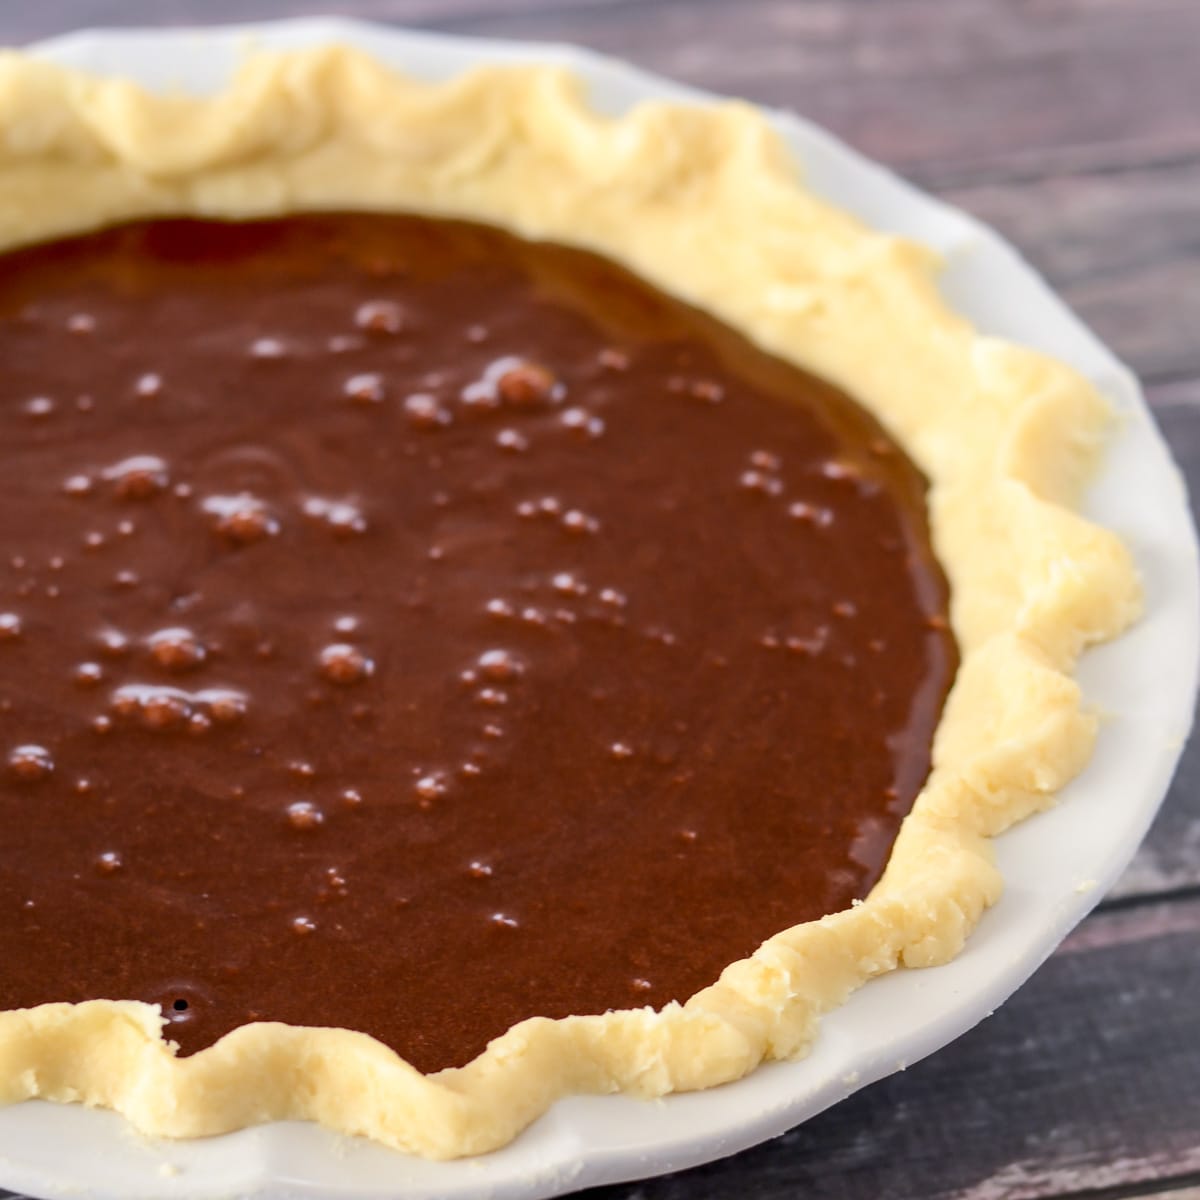 Chocolate filling in pie dish.